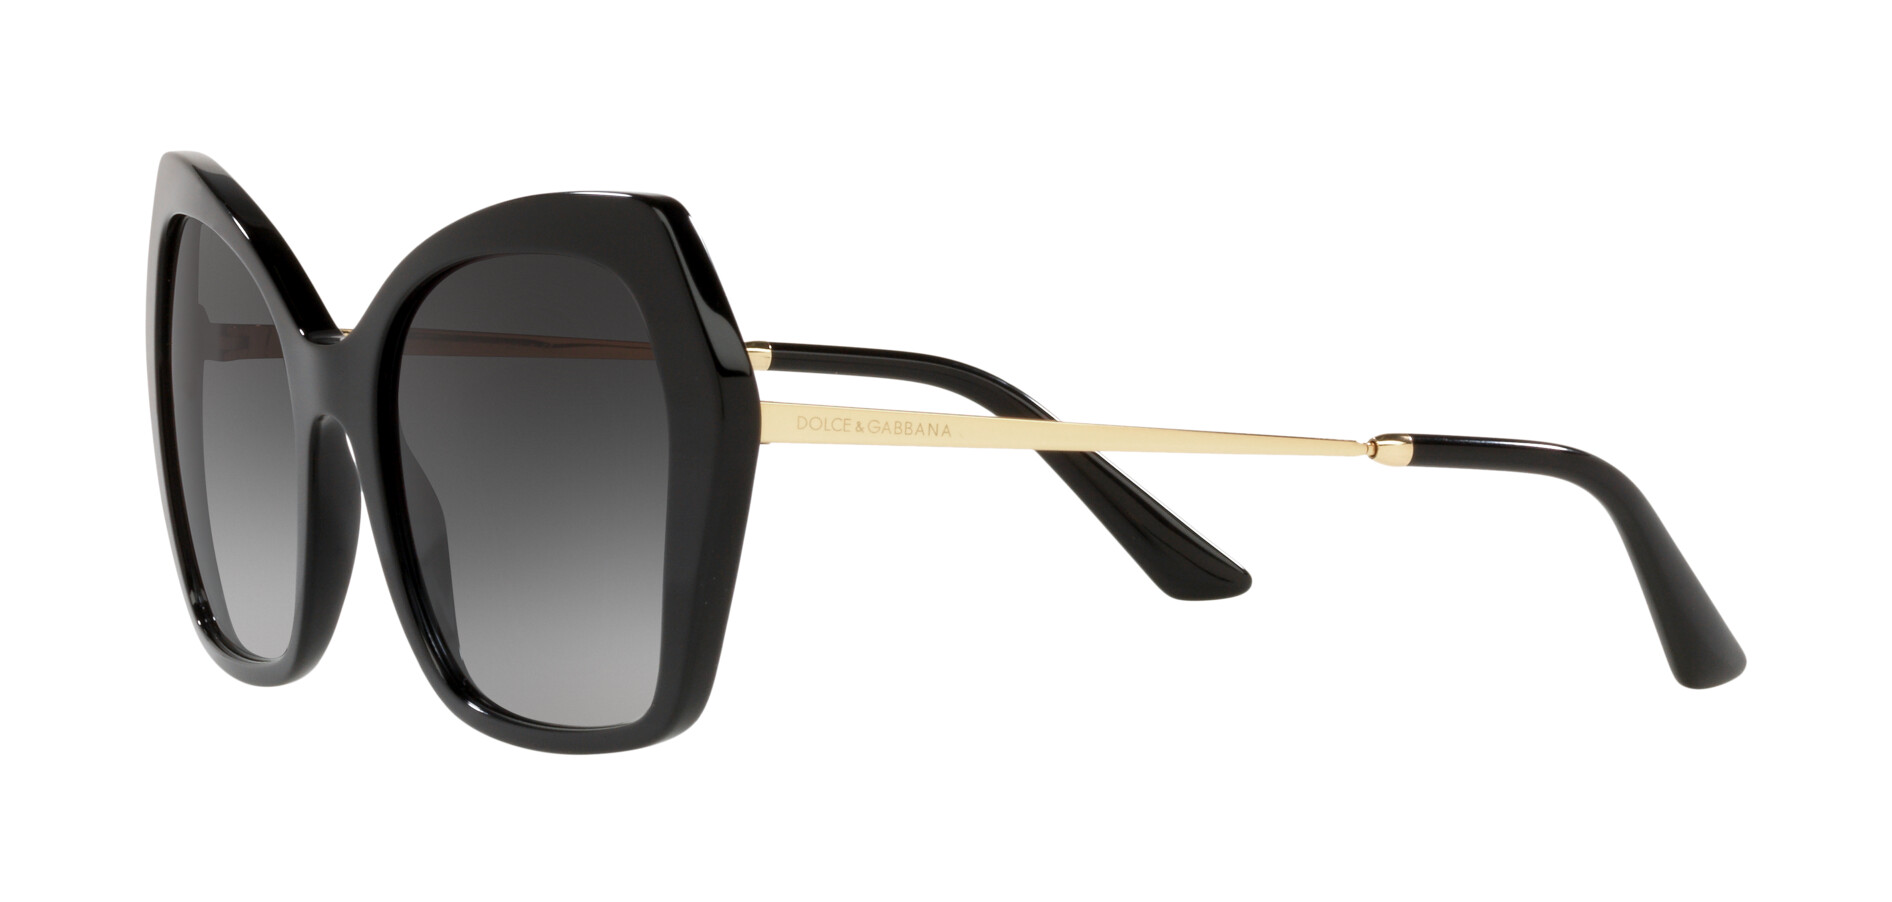 [products.image.angle_left02] Dolce&Gabbana 0DG4399 501/8G Sonnenbrille